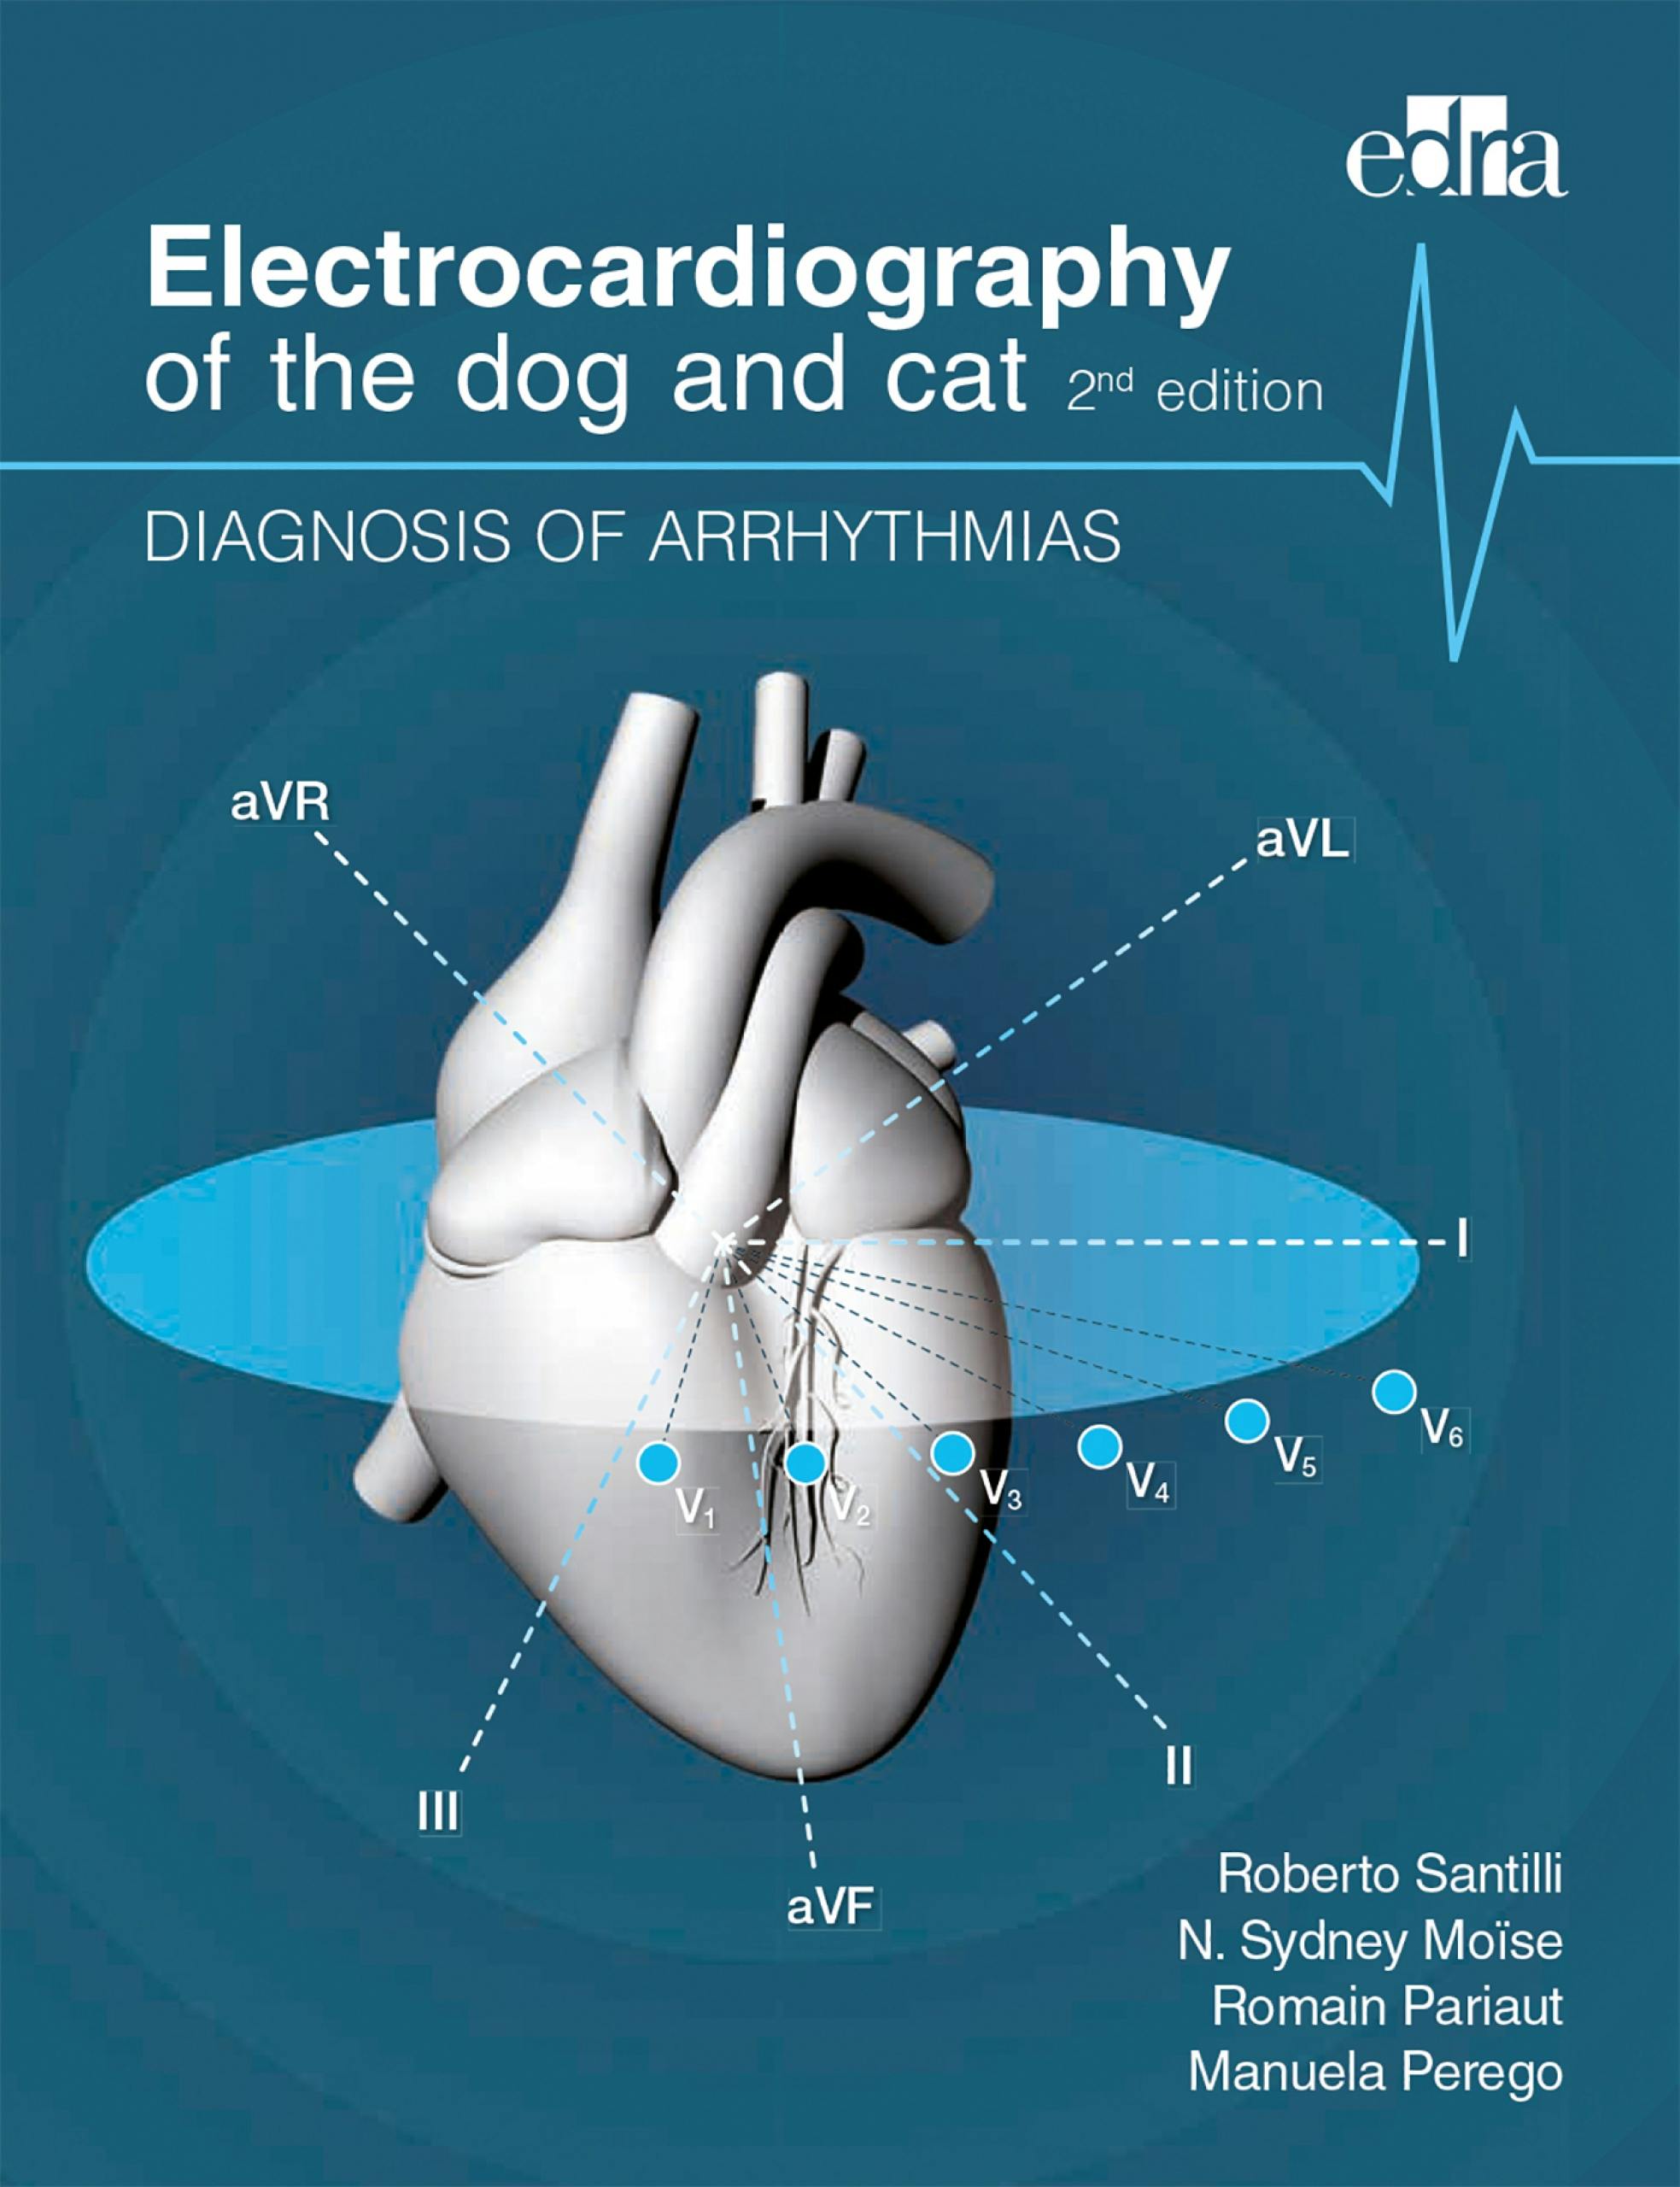 Electrocardiography of the dog and cat - undefined